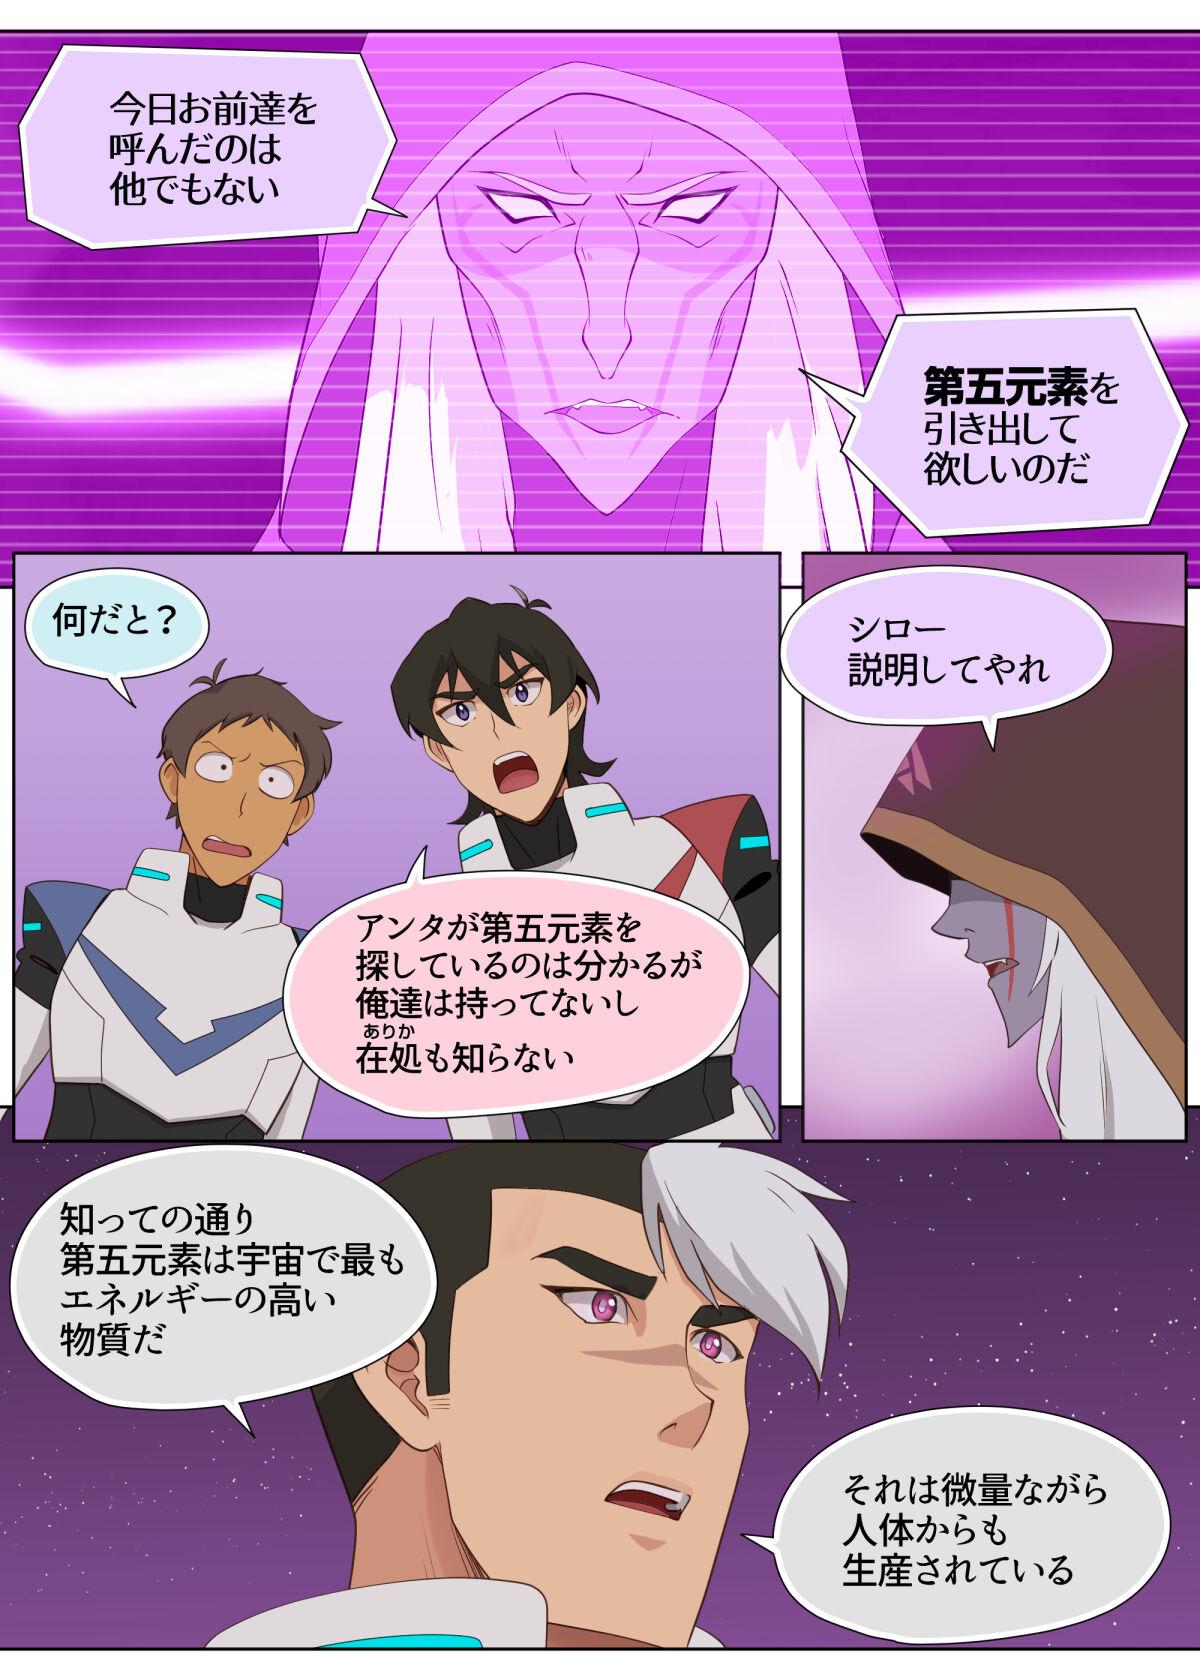 Tits ハガー様のおもちゃ! - Voltron Camgirl - Page 4